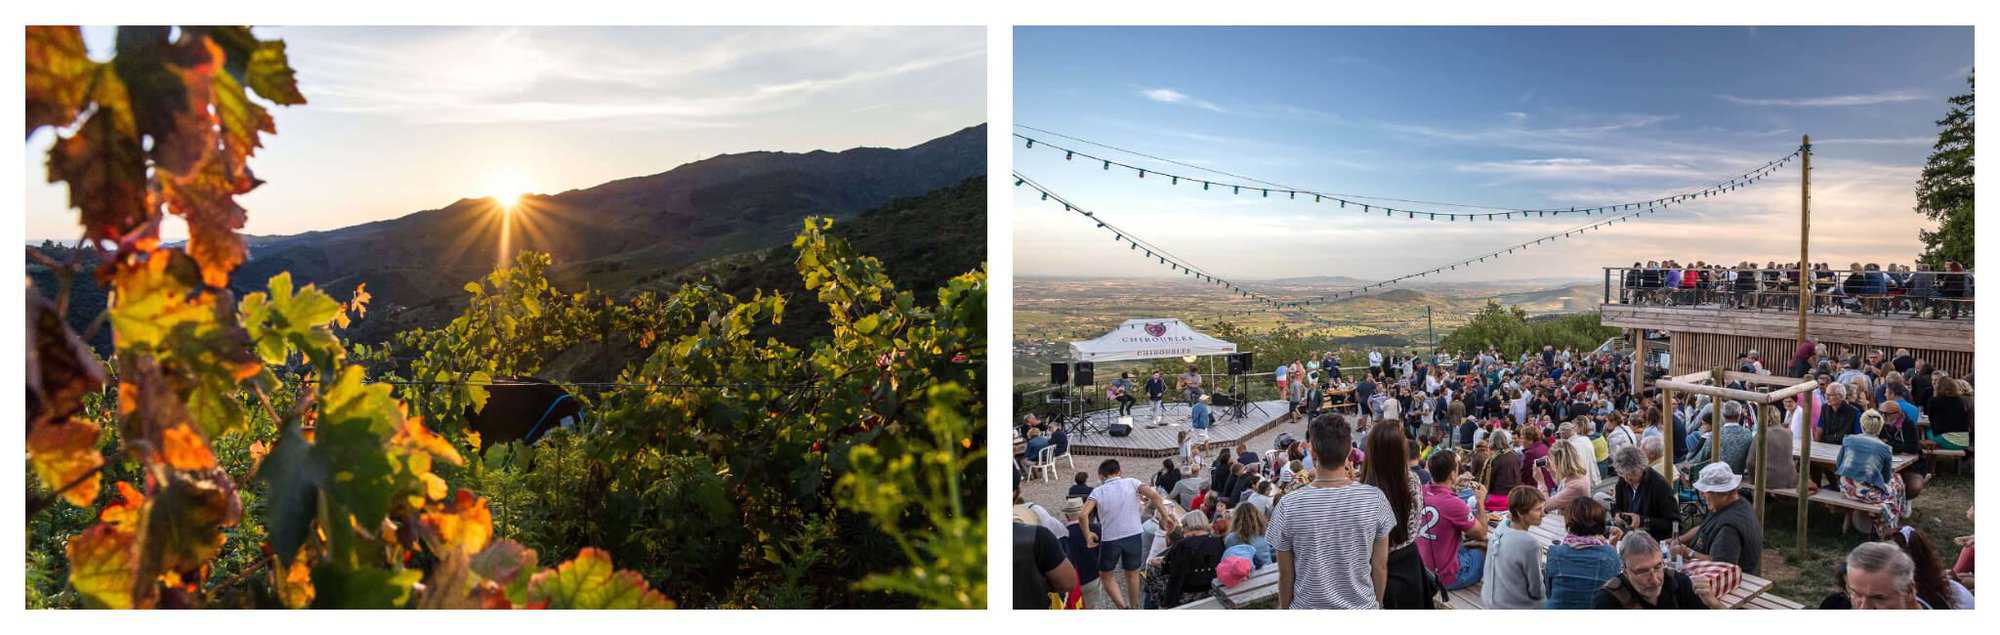 Left: The sun rises from the blue mountains in a vineyard. Right: A crowd is gathered in an arena with a live band.